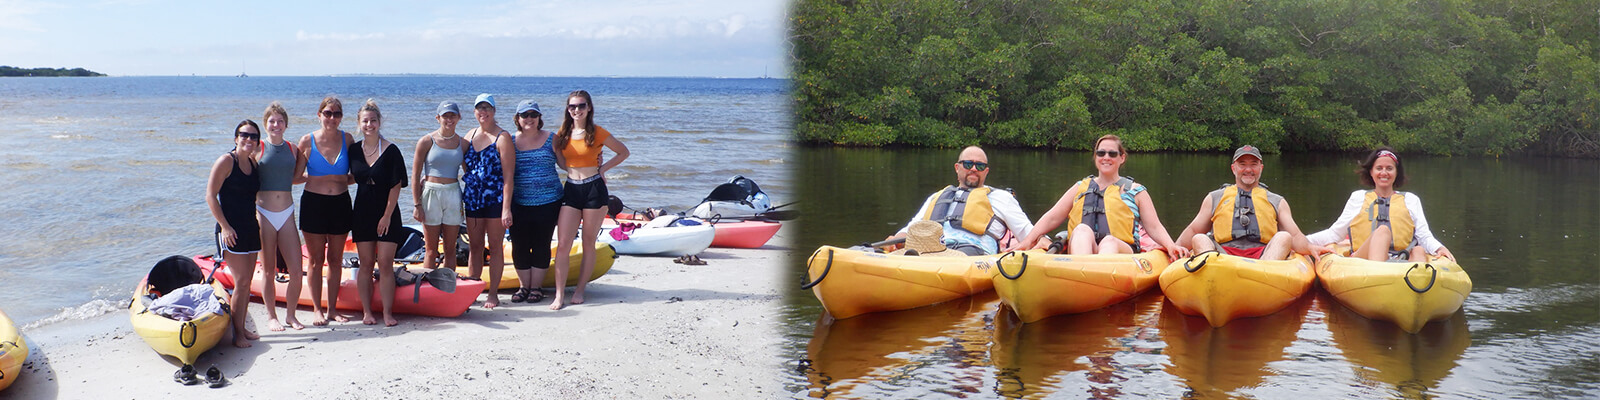 Kayak Excursions Bunche Beach Coupons